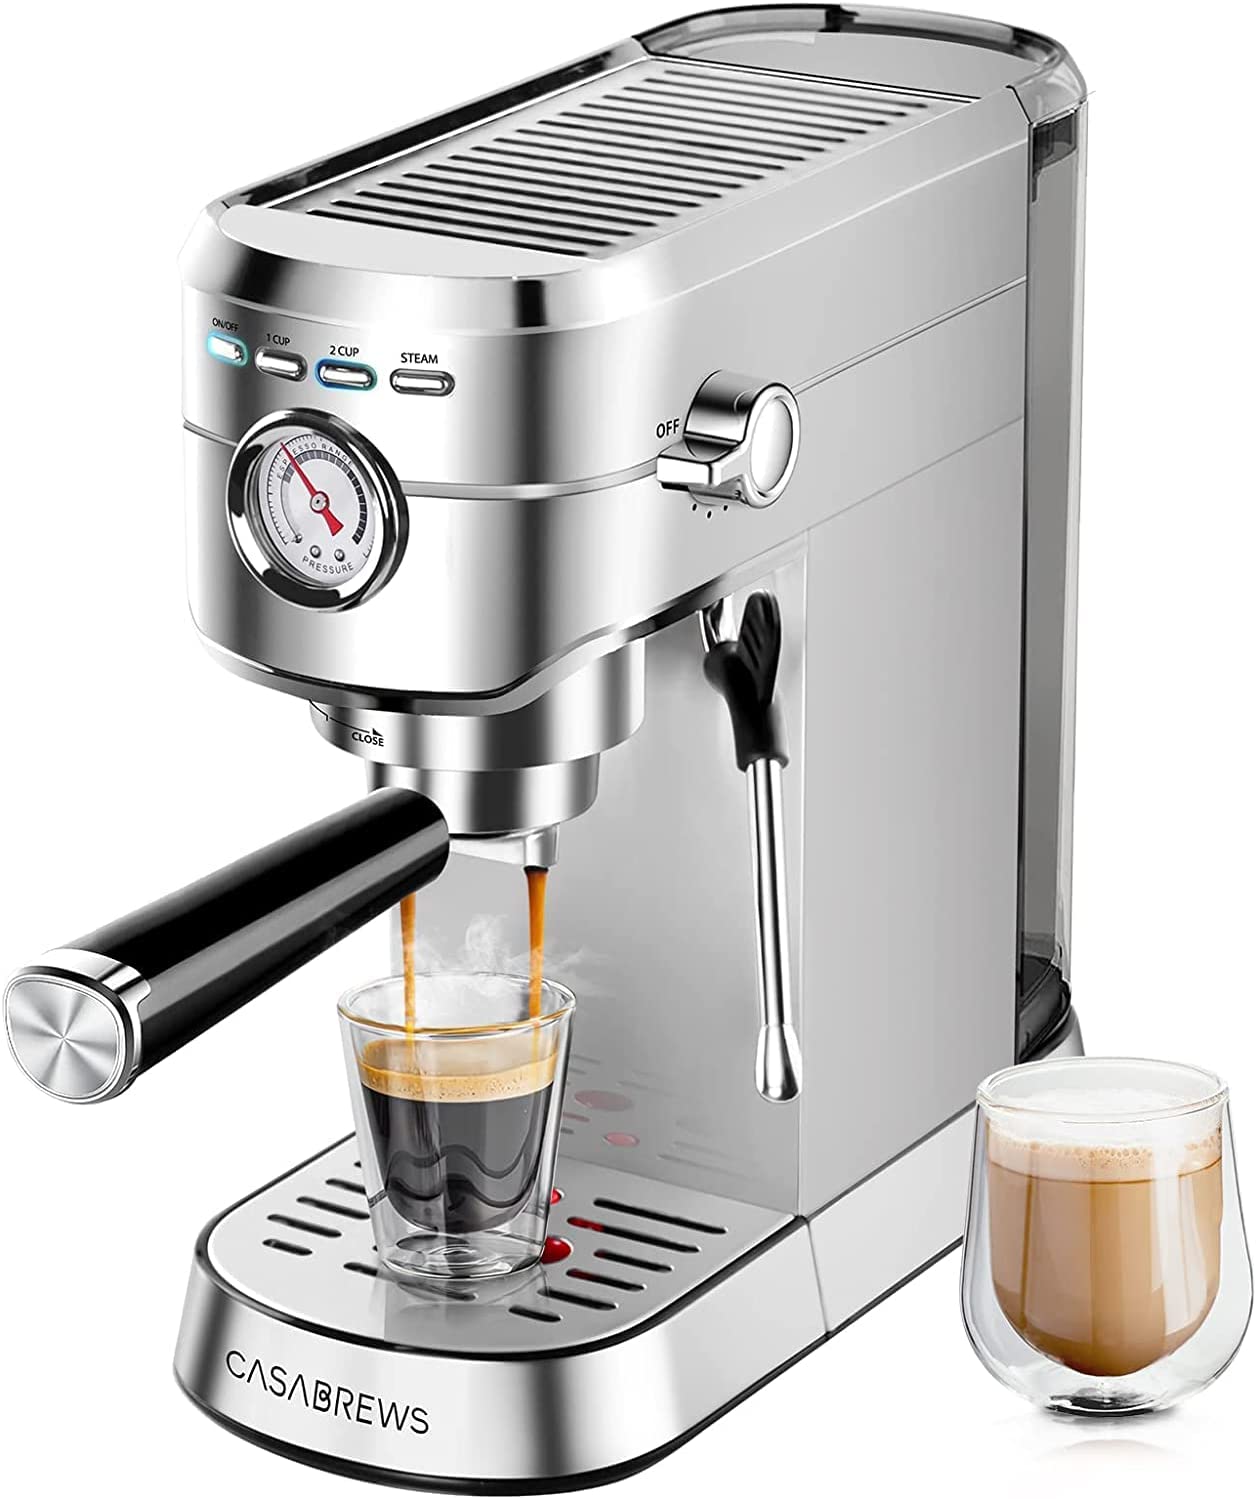 Casabrews Espresso Machine silver with a black coffee in a glass and a milky coffee in a glass.